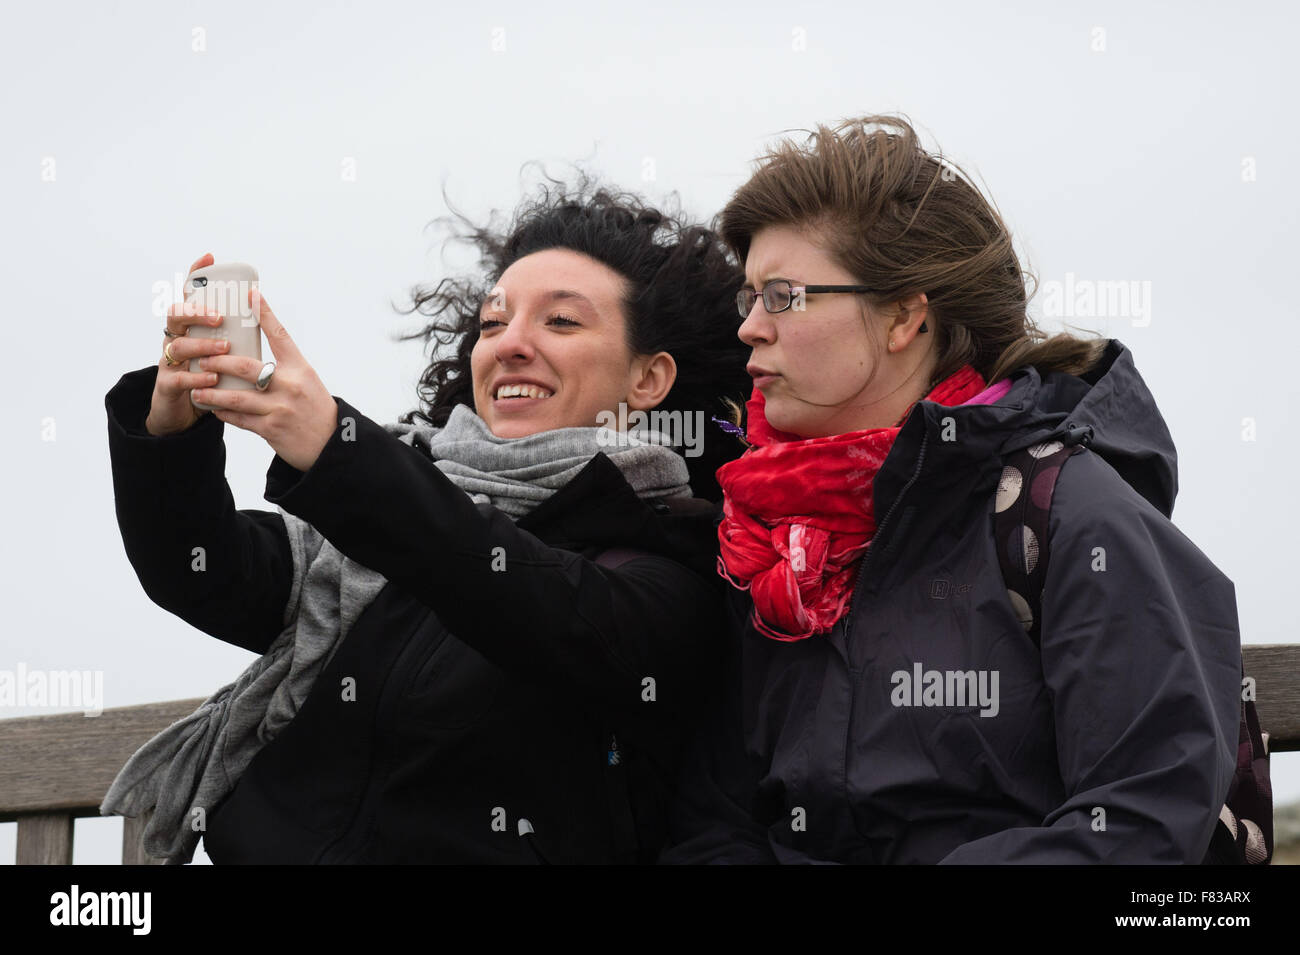 Aberystwyth Wales UK, Saturday 05 December 2015  Two women take a 'selfie' as they get blown by high winds  The fourth named storm of the season, Storm Desmond, picks up strength and begins to batter the coast at Aberystwyth, west Wales  photo: © Keith Morris / Alamy Live  News Stock Photo